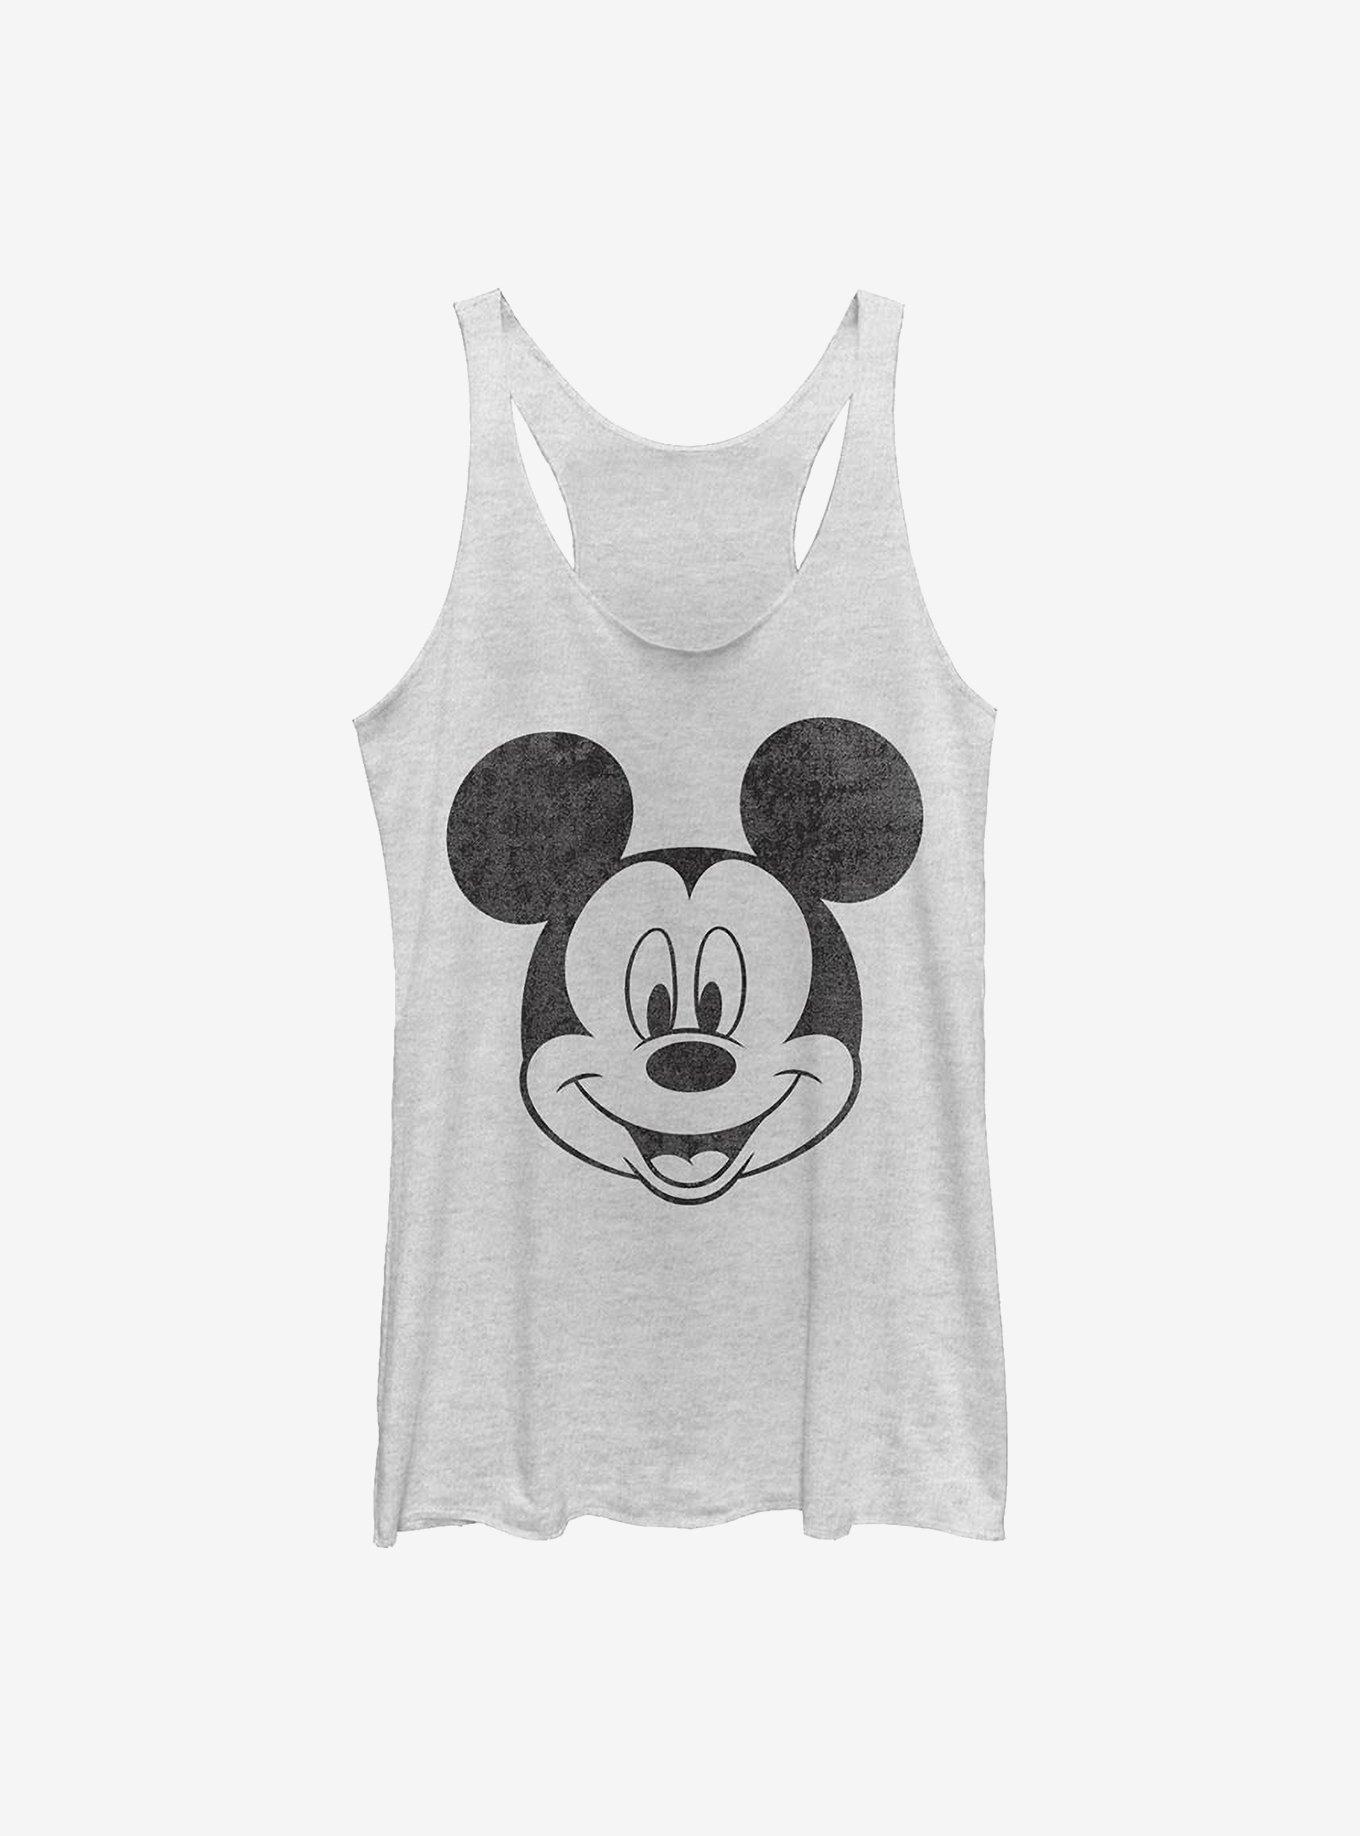 Disney Mickey Mouse Mickey Face Girls Tank, WHITE HTR, hi-res